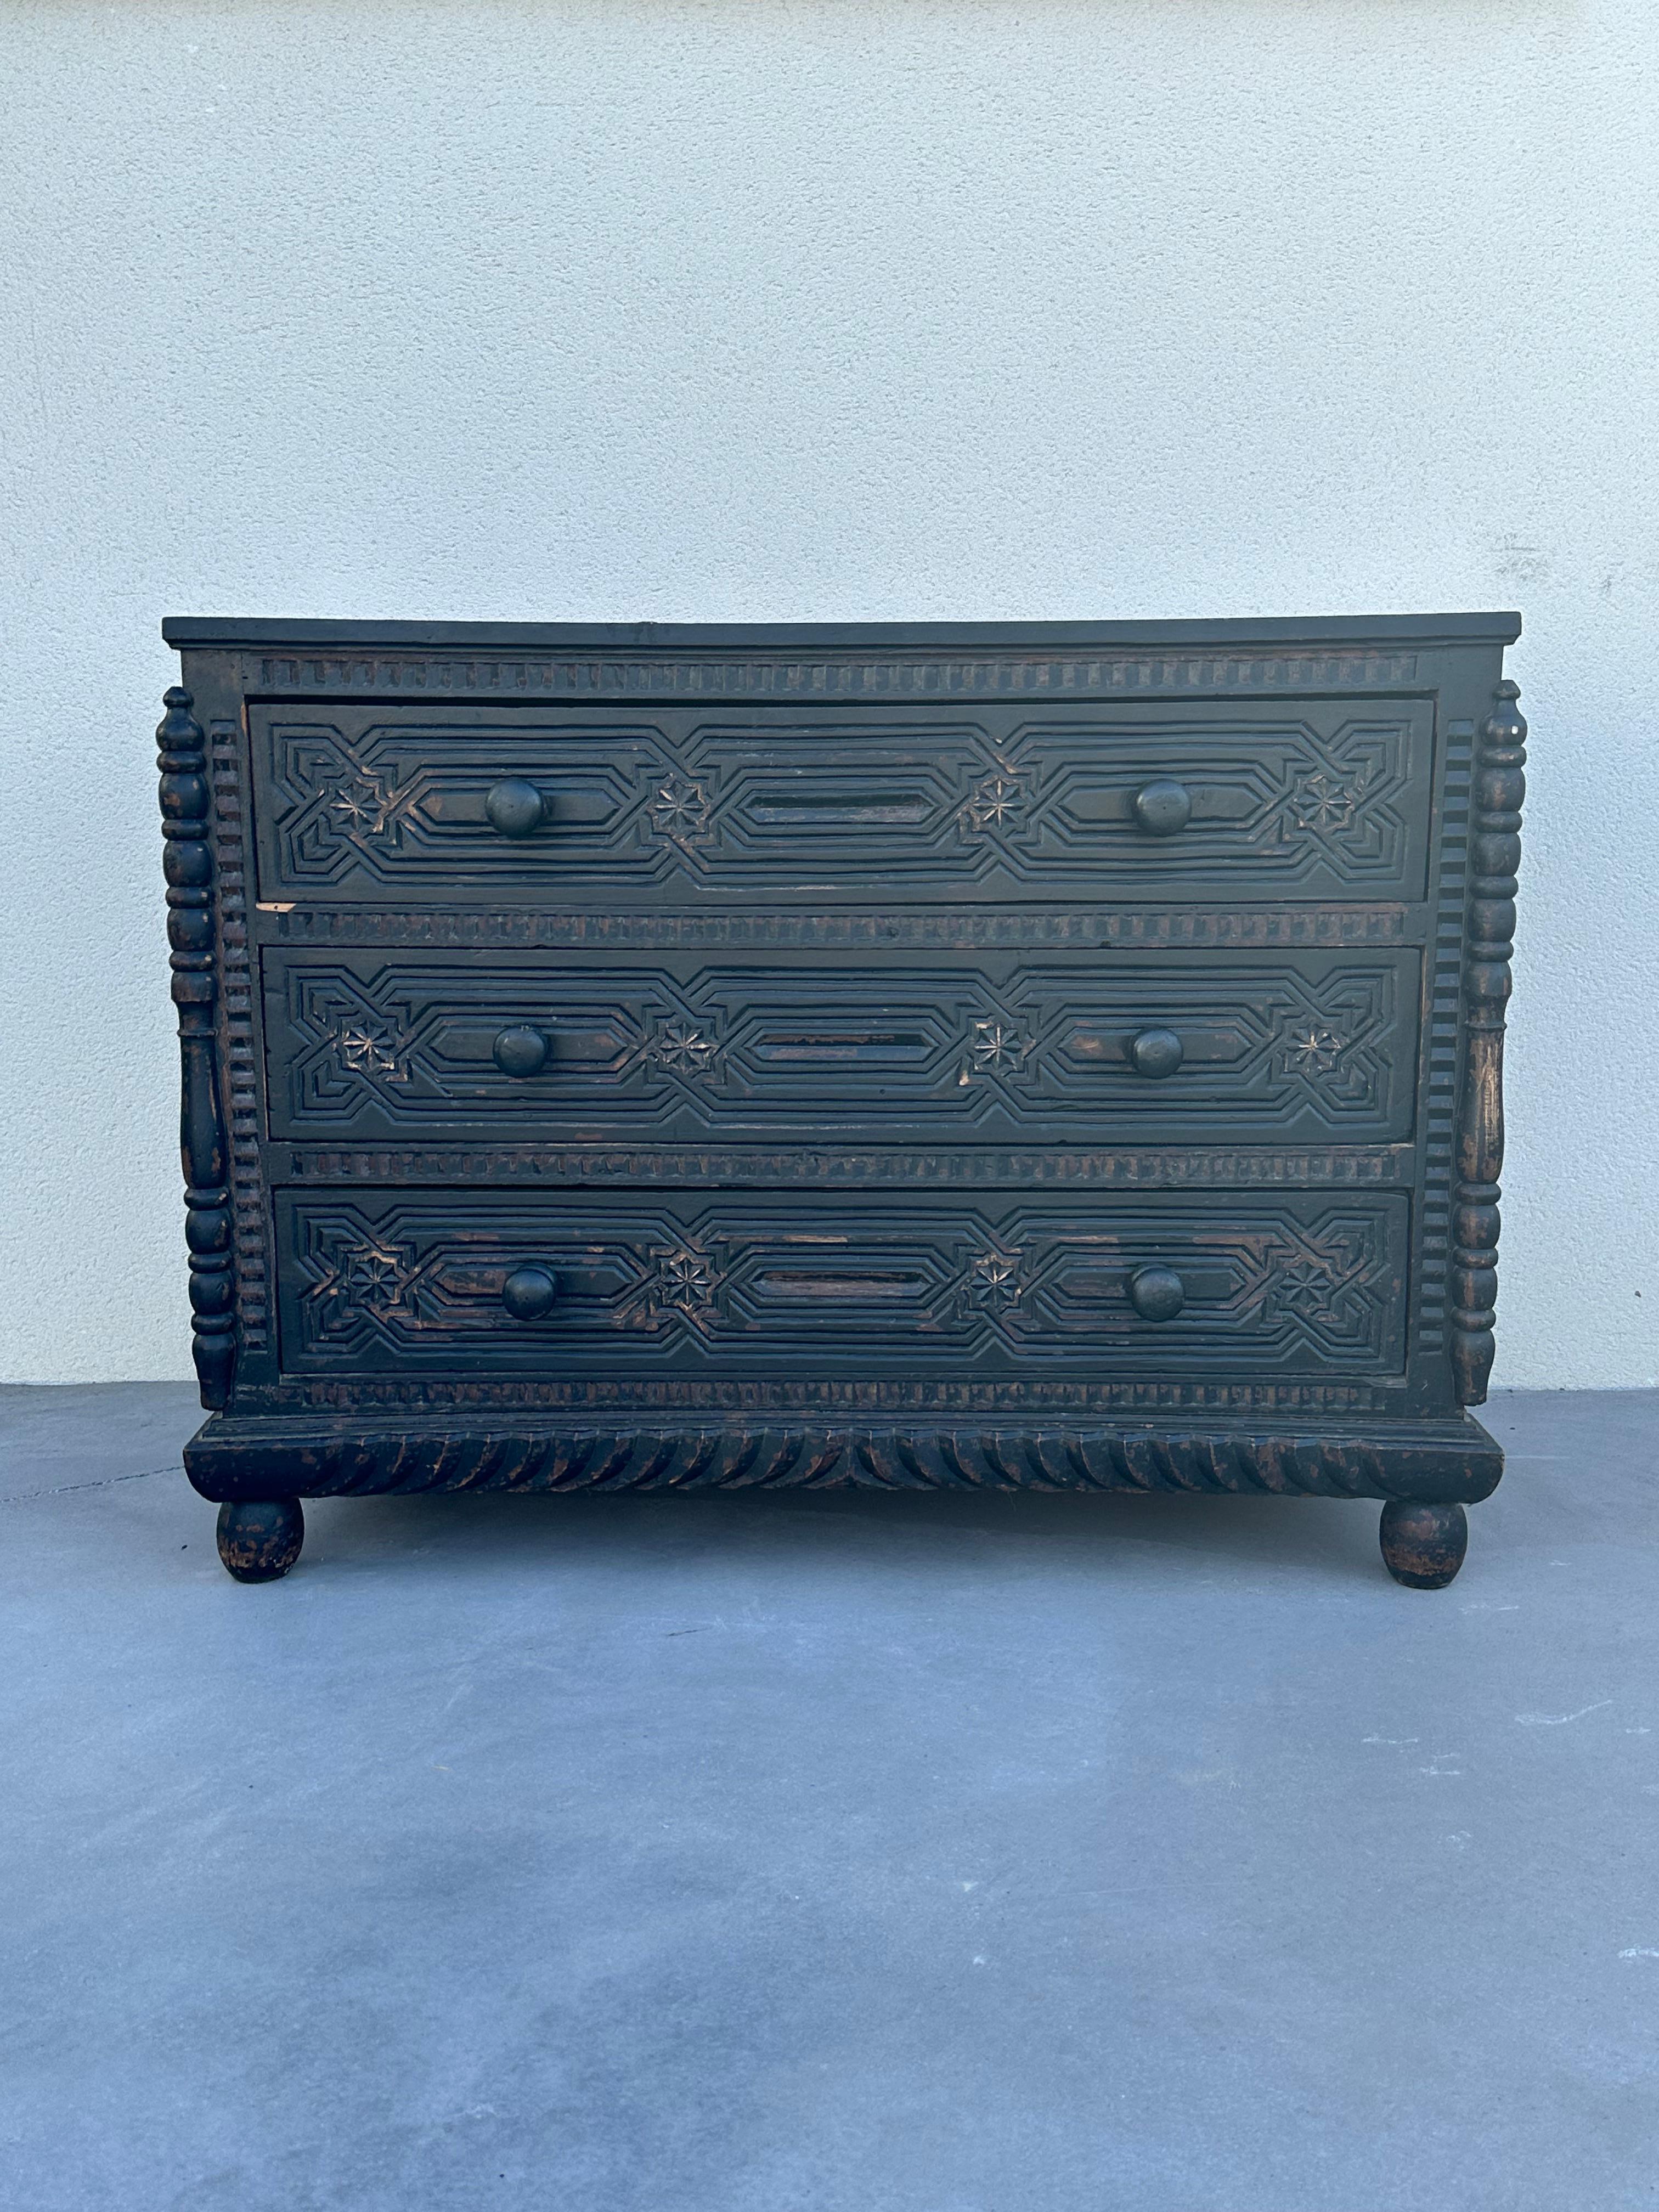 Magnificent old “shabby chic” chest of drawers.

This piece of furniture is very elaborate. the three drawers are graphically sculpted, revealing several stylized stars. Each corner of the chest of drawers is decorated with turned wood reminiscent